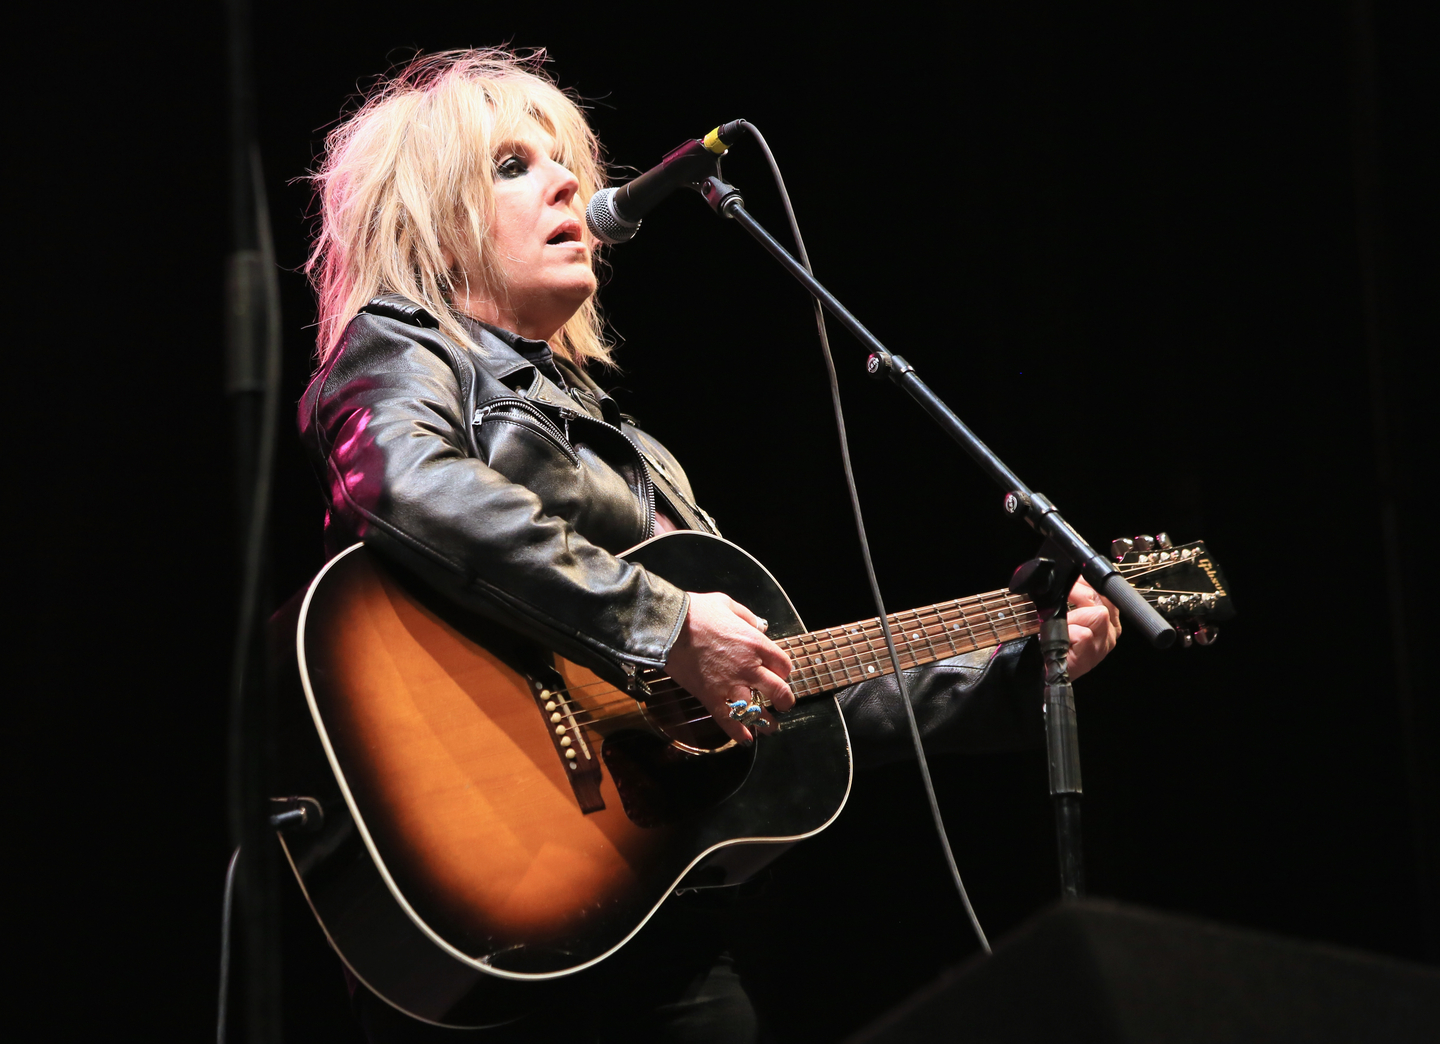 Lucinda Williams, 2014. Photo by Heather Kennedy/Getty Images for SXSW